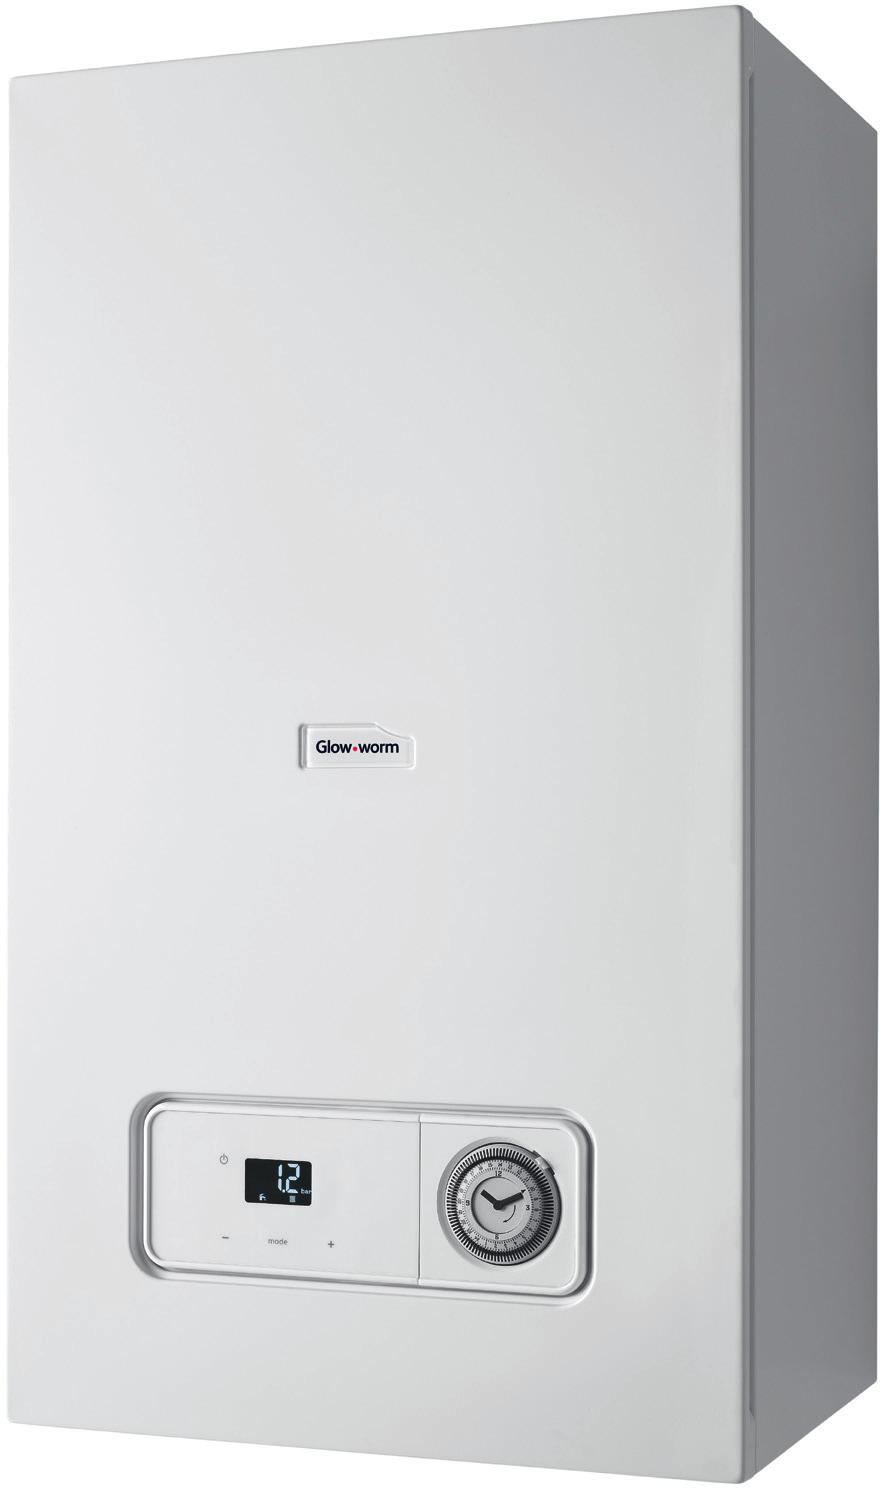 2 EASICOM Easicom Quality, reliability, flexibility The Easicom from Glow-worm is a high efficiency A-rated boiler which comes with a choice of outputs,